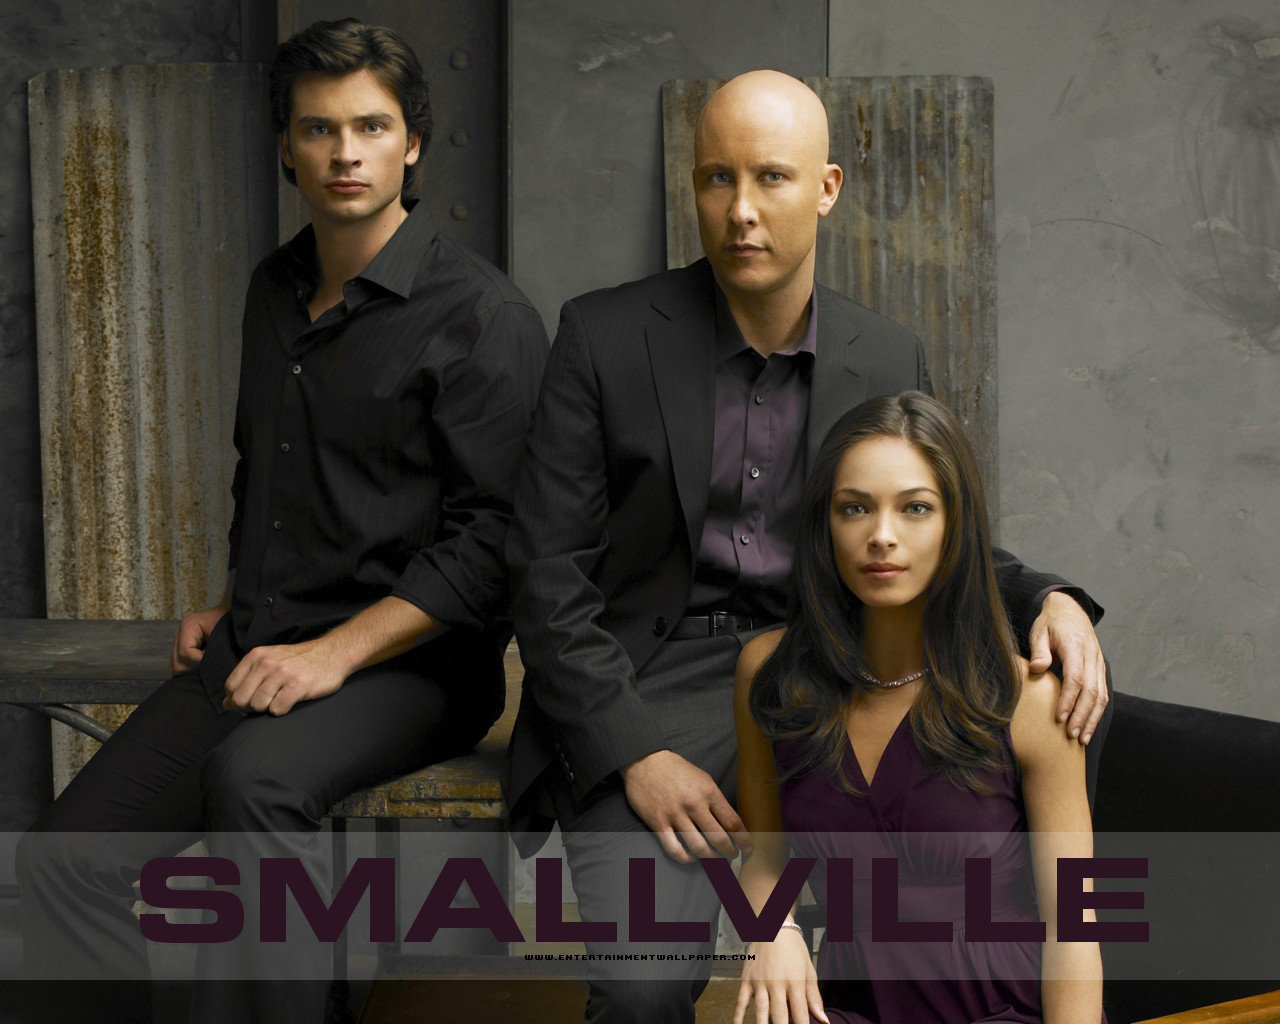 Smallville Image HD Wallpaper And Background Photos